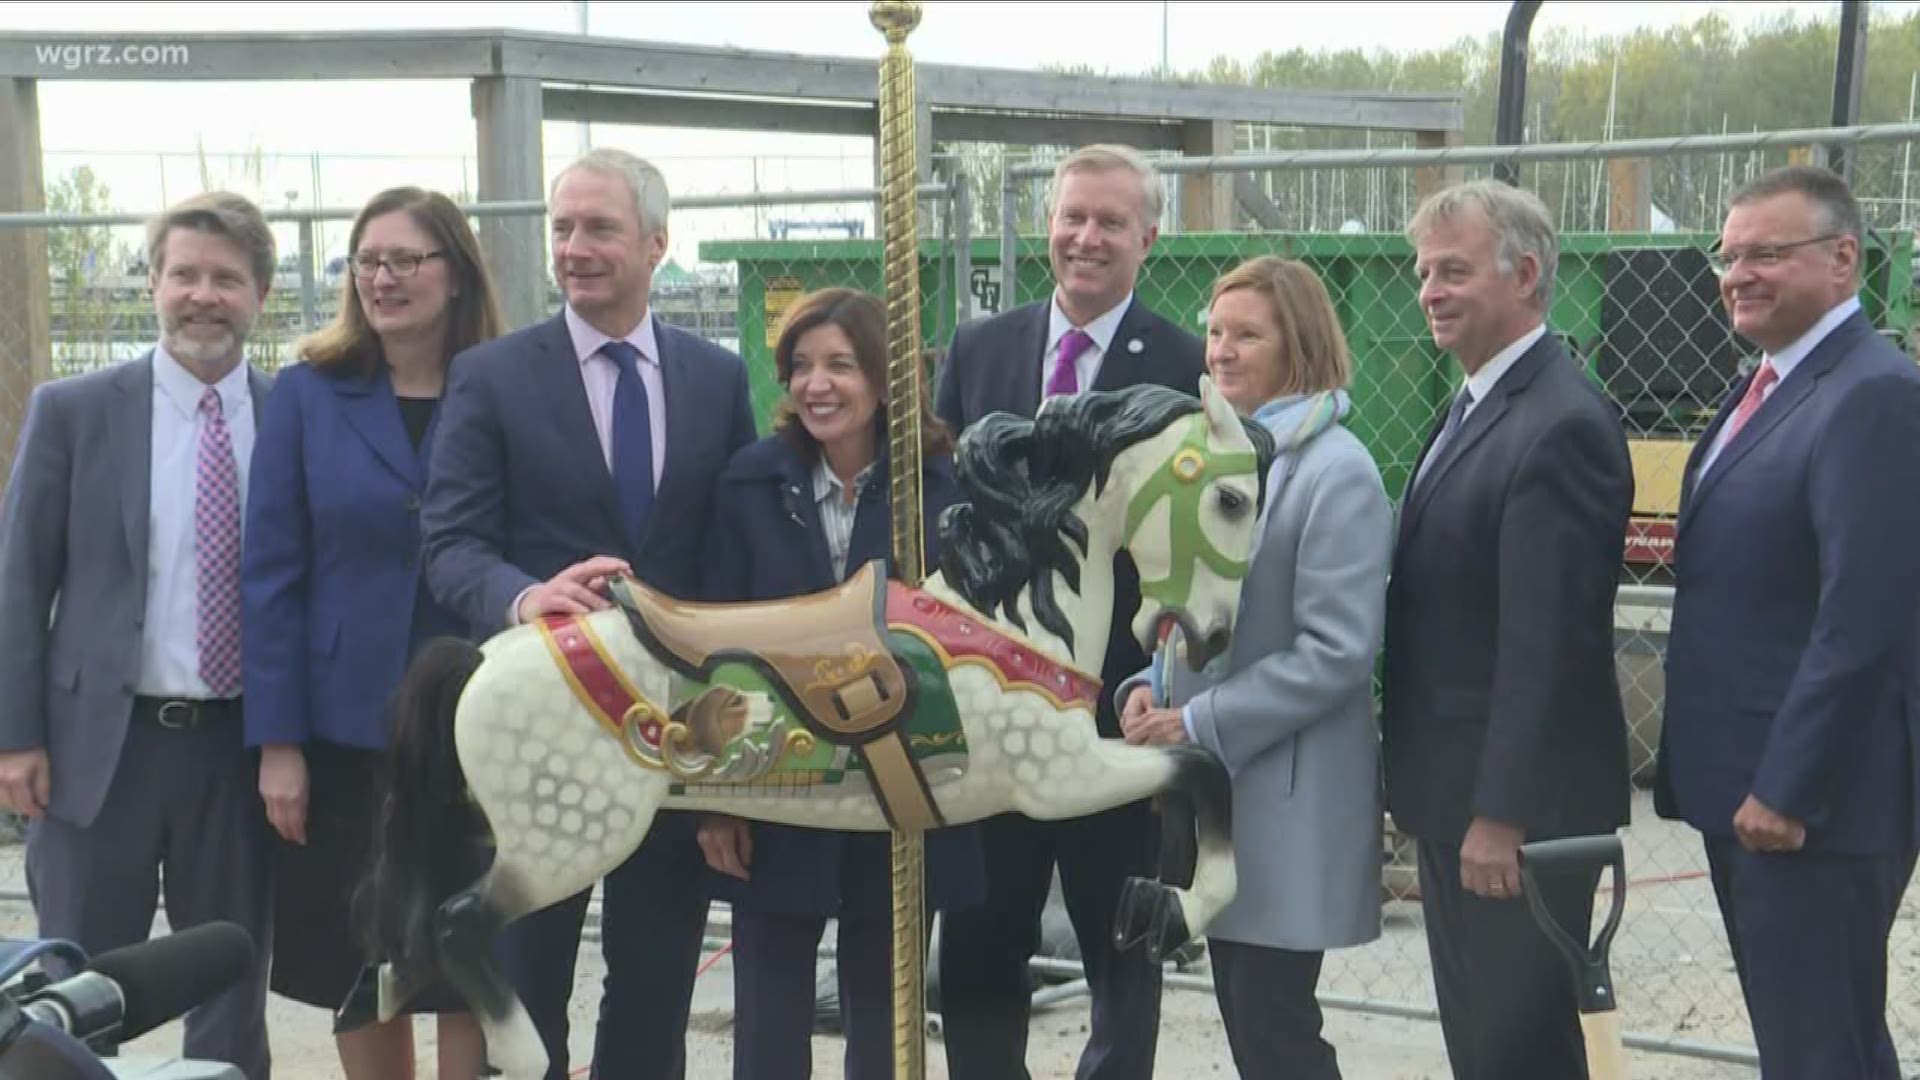 They broke ground just a few hours ago on the new Buffalo Heritage Carousel.